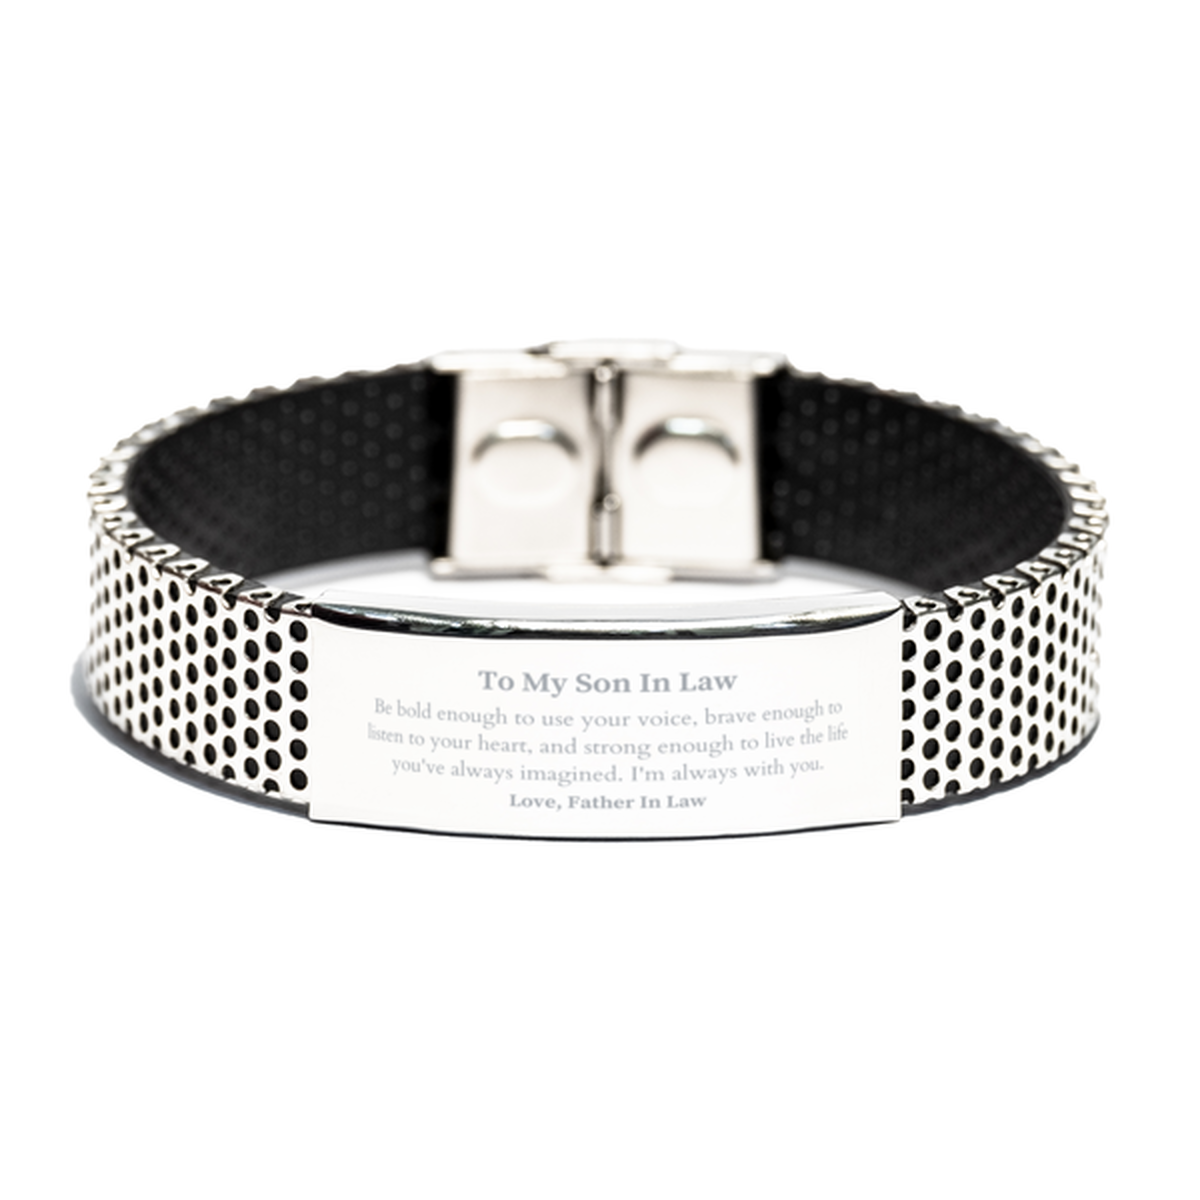 Keepsake Son In Law Stainless Steel Bracelet Gift Idea Graduation Christmas Birthday Son In Law from Father In Law, Son In Law Be bold enough to use your voice, brave enough to listen to your heart. Love, Father In Law